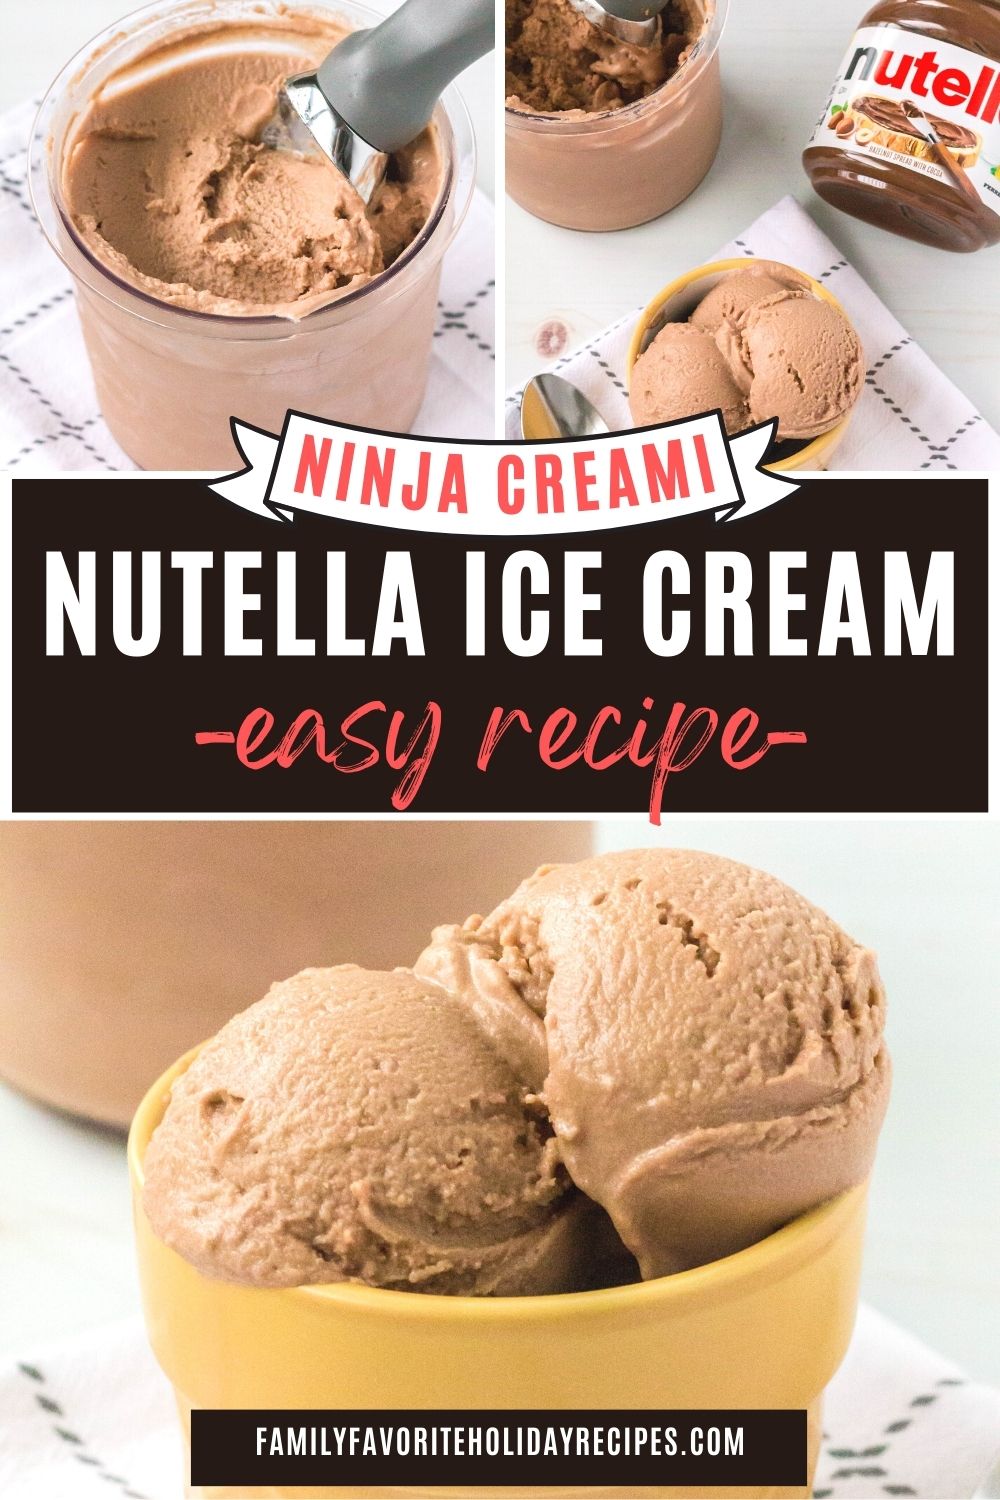 collage of three images; one shows a ninja creami pint with chocolate hazelnut ice cream, the other shows a dish of ice cream next to a jar of nutella, and the other shows a close-up of two scoops of ninja creami nutella ice cream in a dish